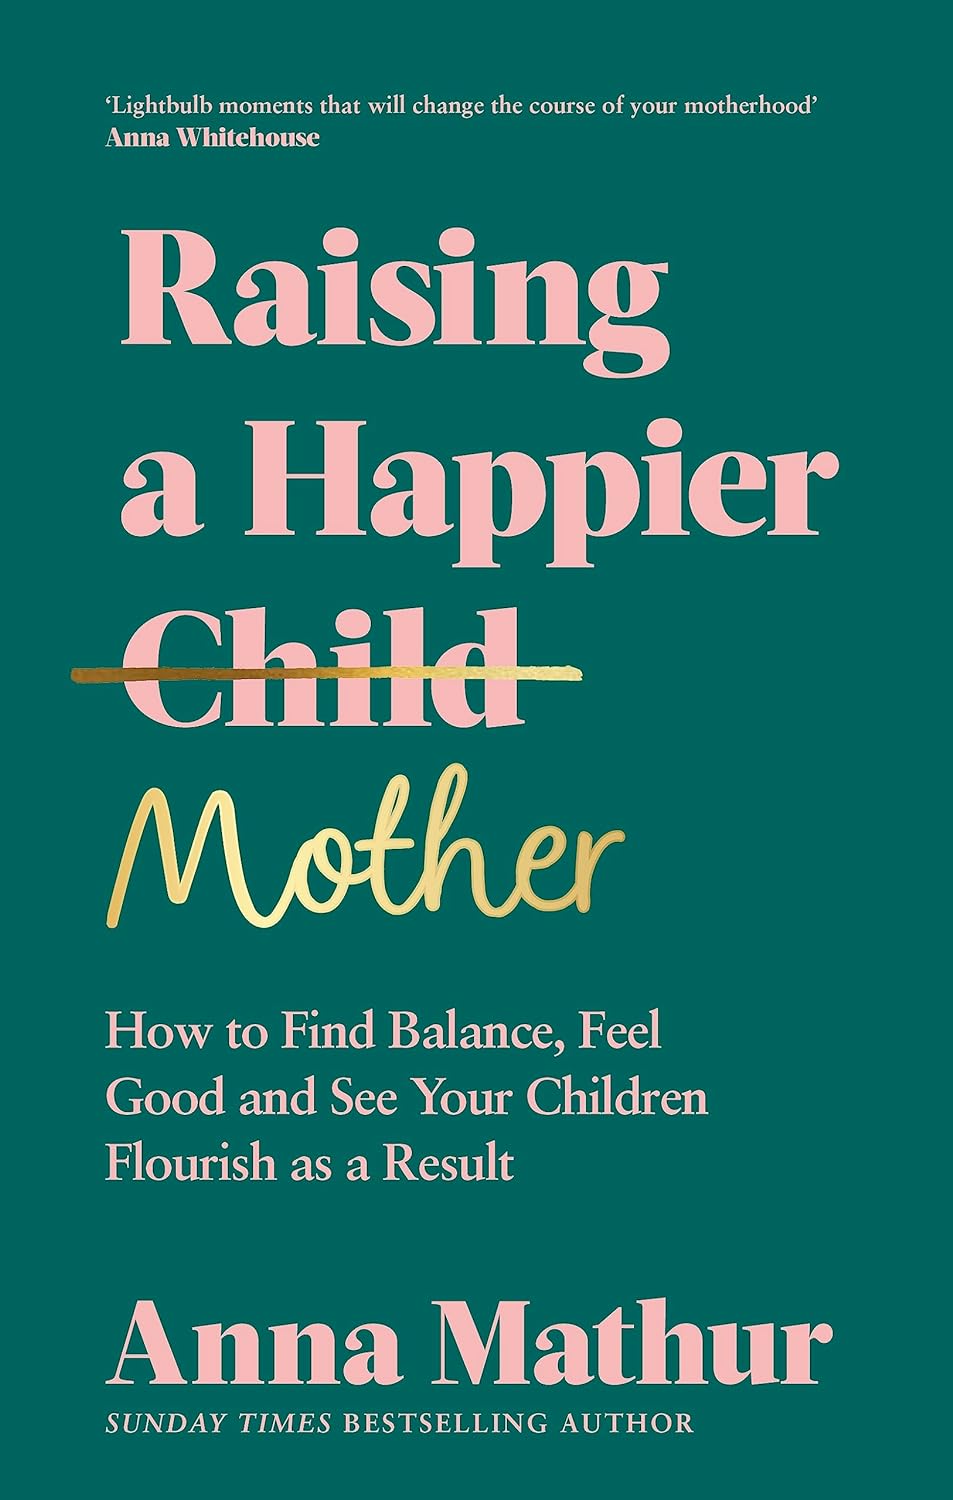 Raising a happier mother :  how to find balance, feel good and see your children flourish as a result